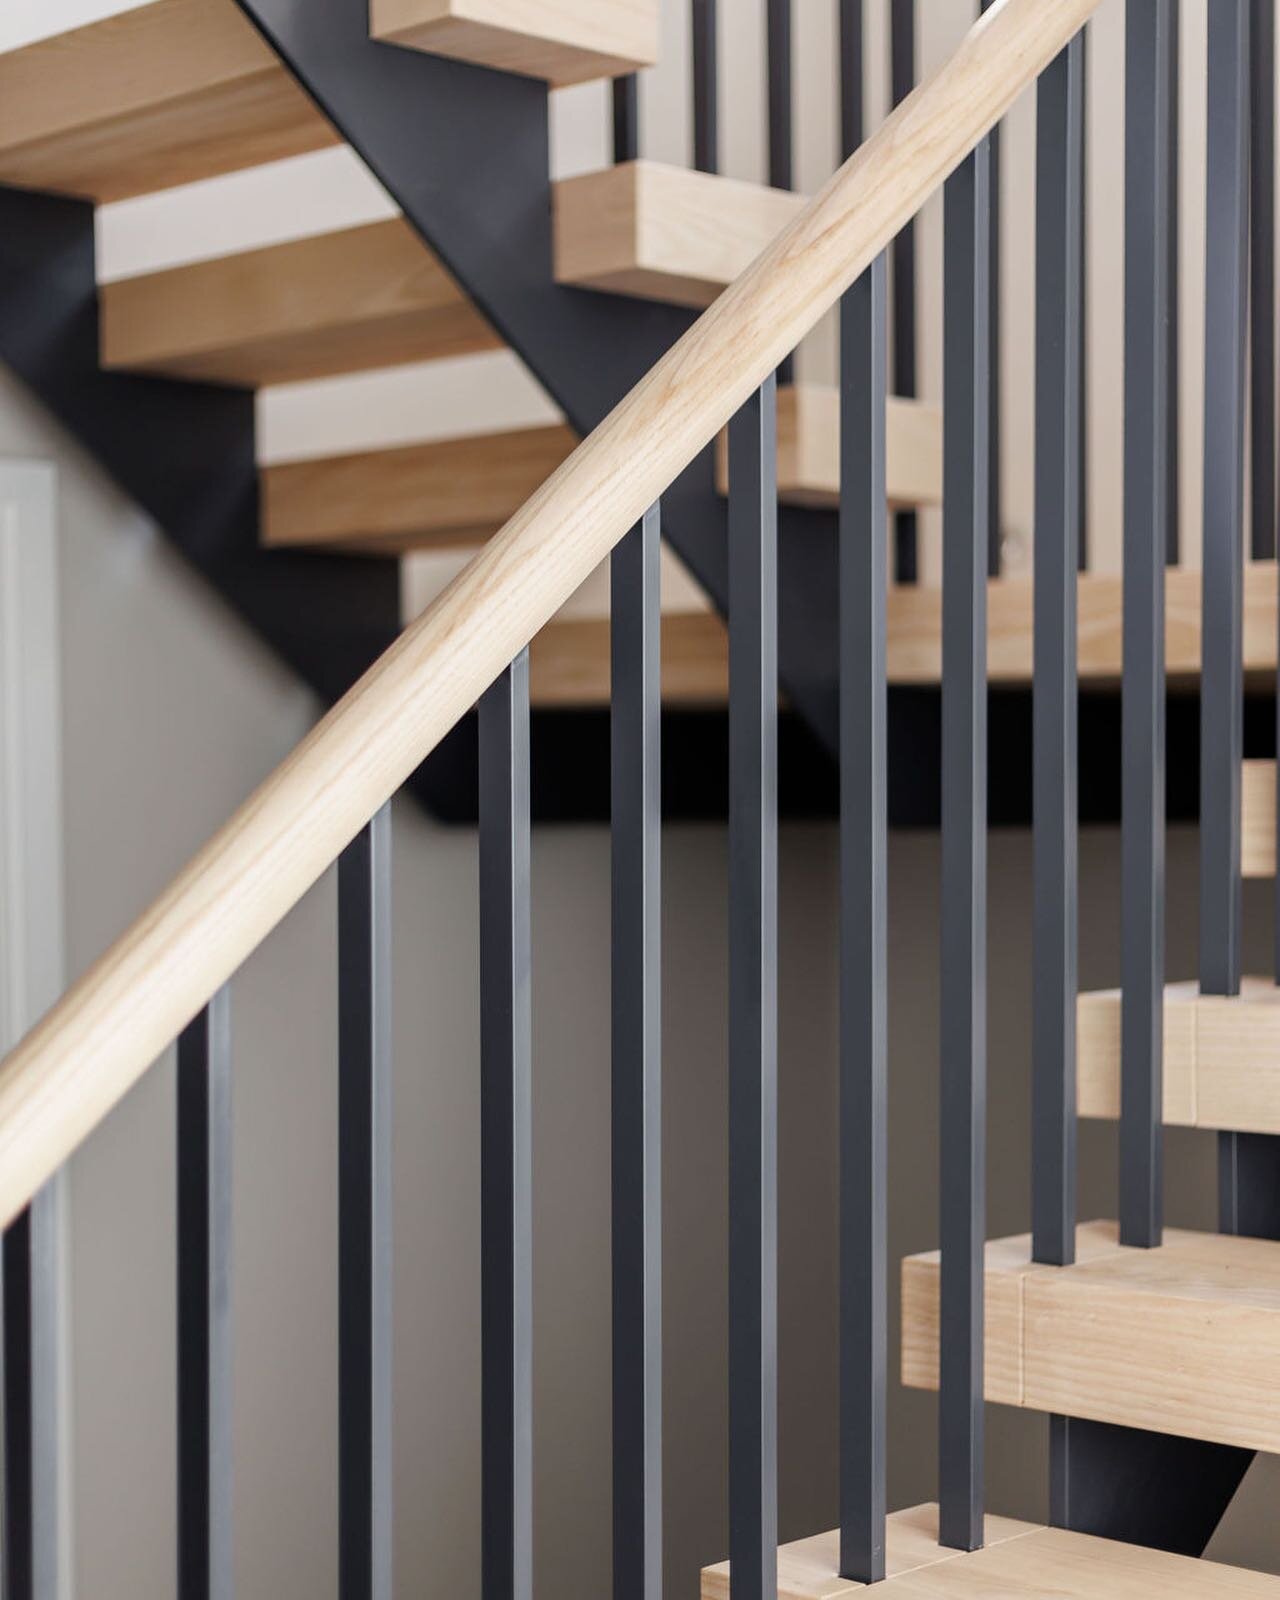 Our bespoke staircase design for a recently completed family home in Poole. 

The staircase extends across three floors and creates a unique focal point, at the heart of the house. We designed every detail through our fully coordinated drawing packag